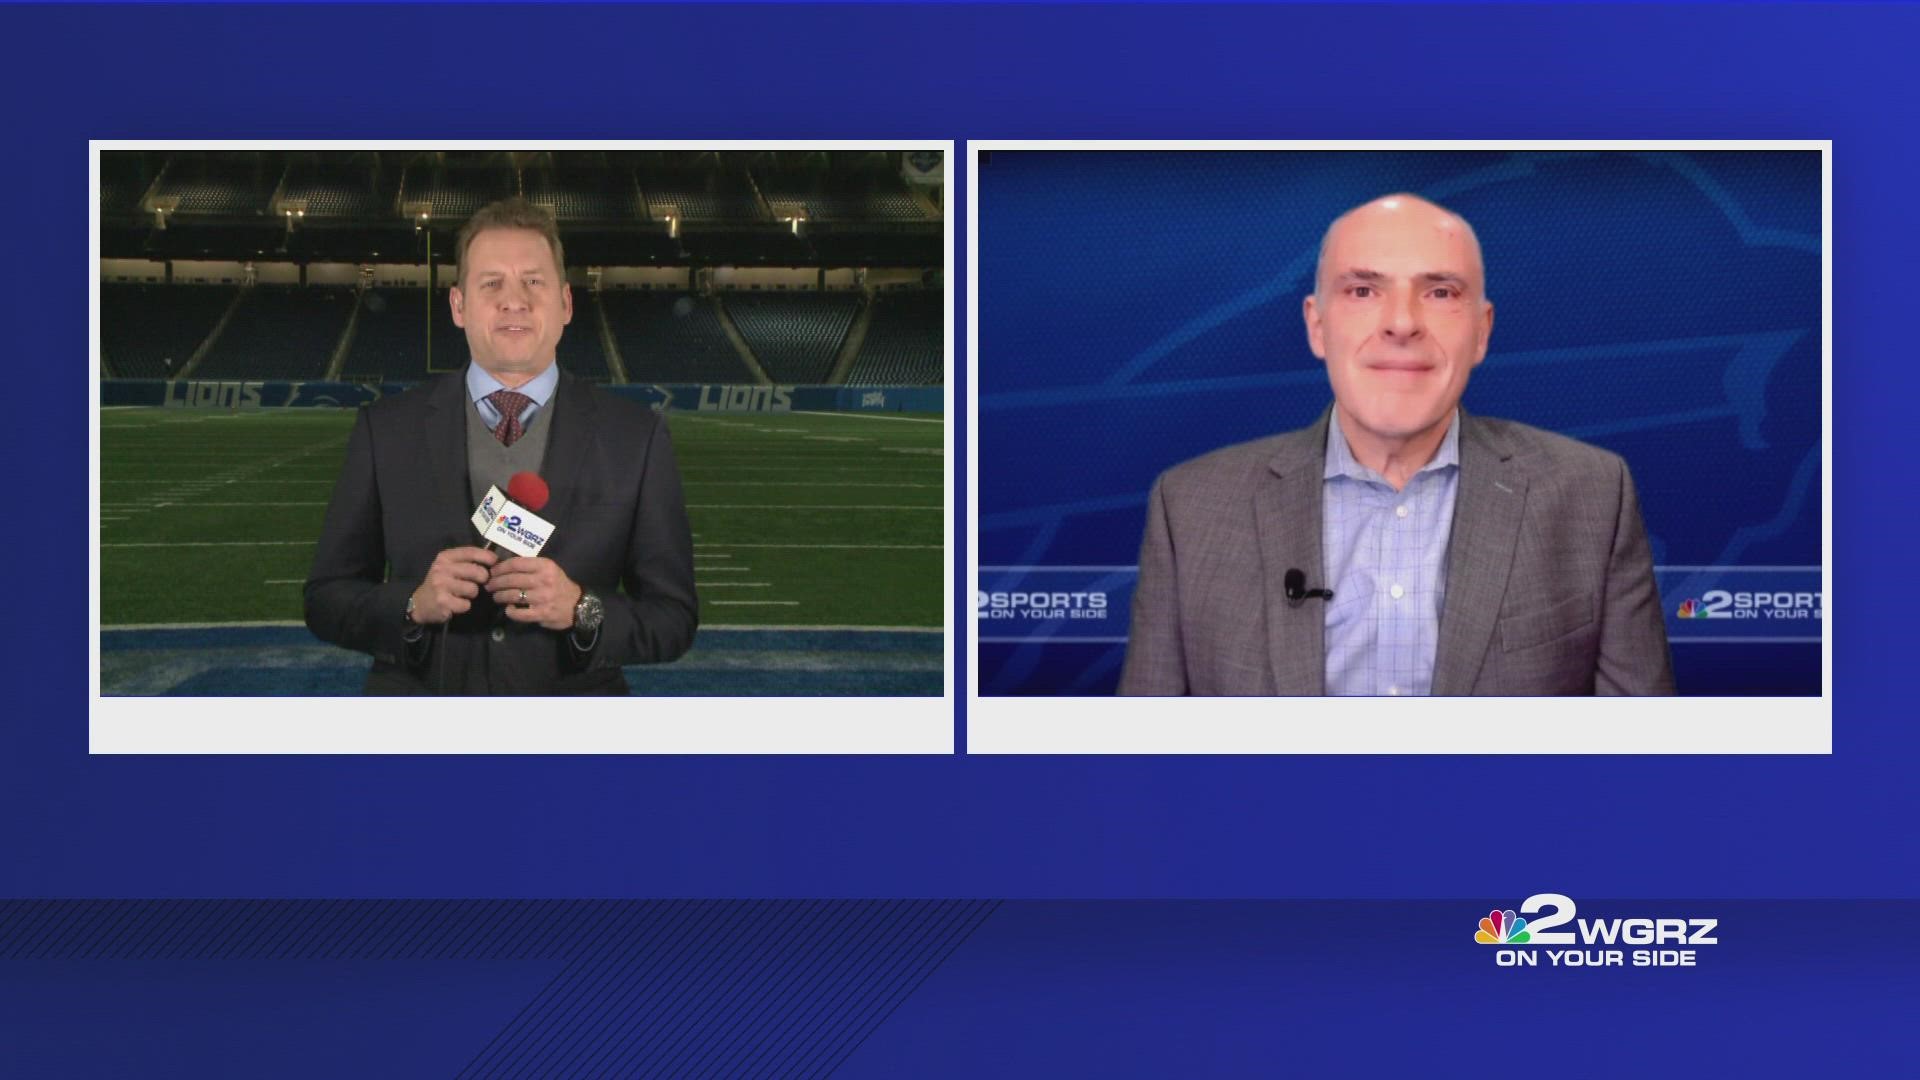 Channel 2 Sports Director Adam Benigni and WGRZ Bills/NFL Insider Vic Carucci discuss the Bills' Week 12 win against the Lions in Detroit.